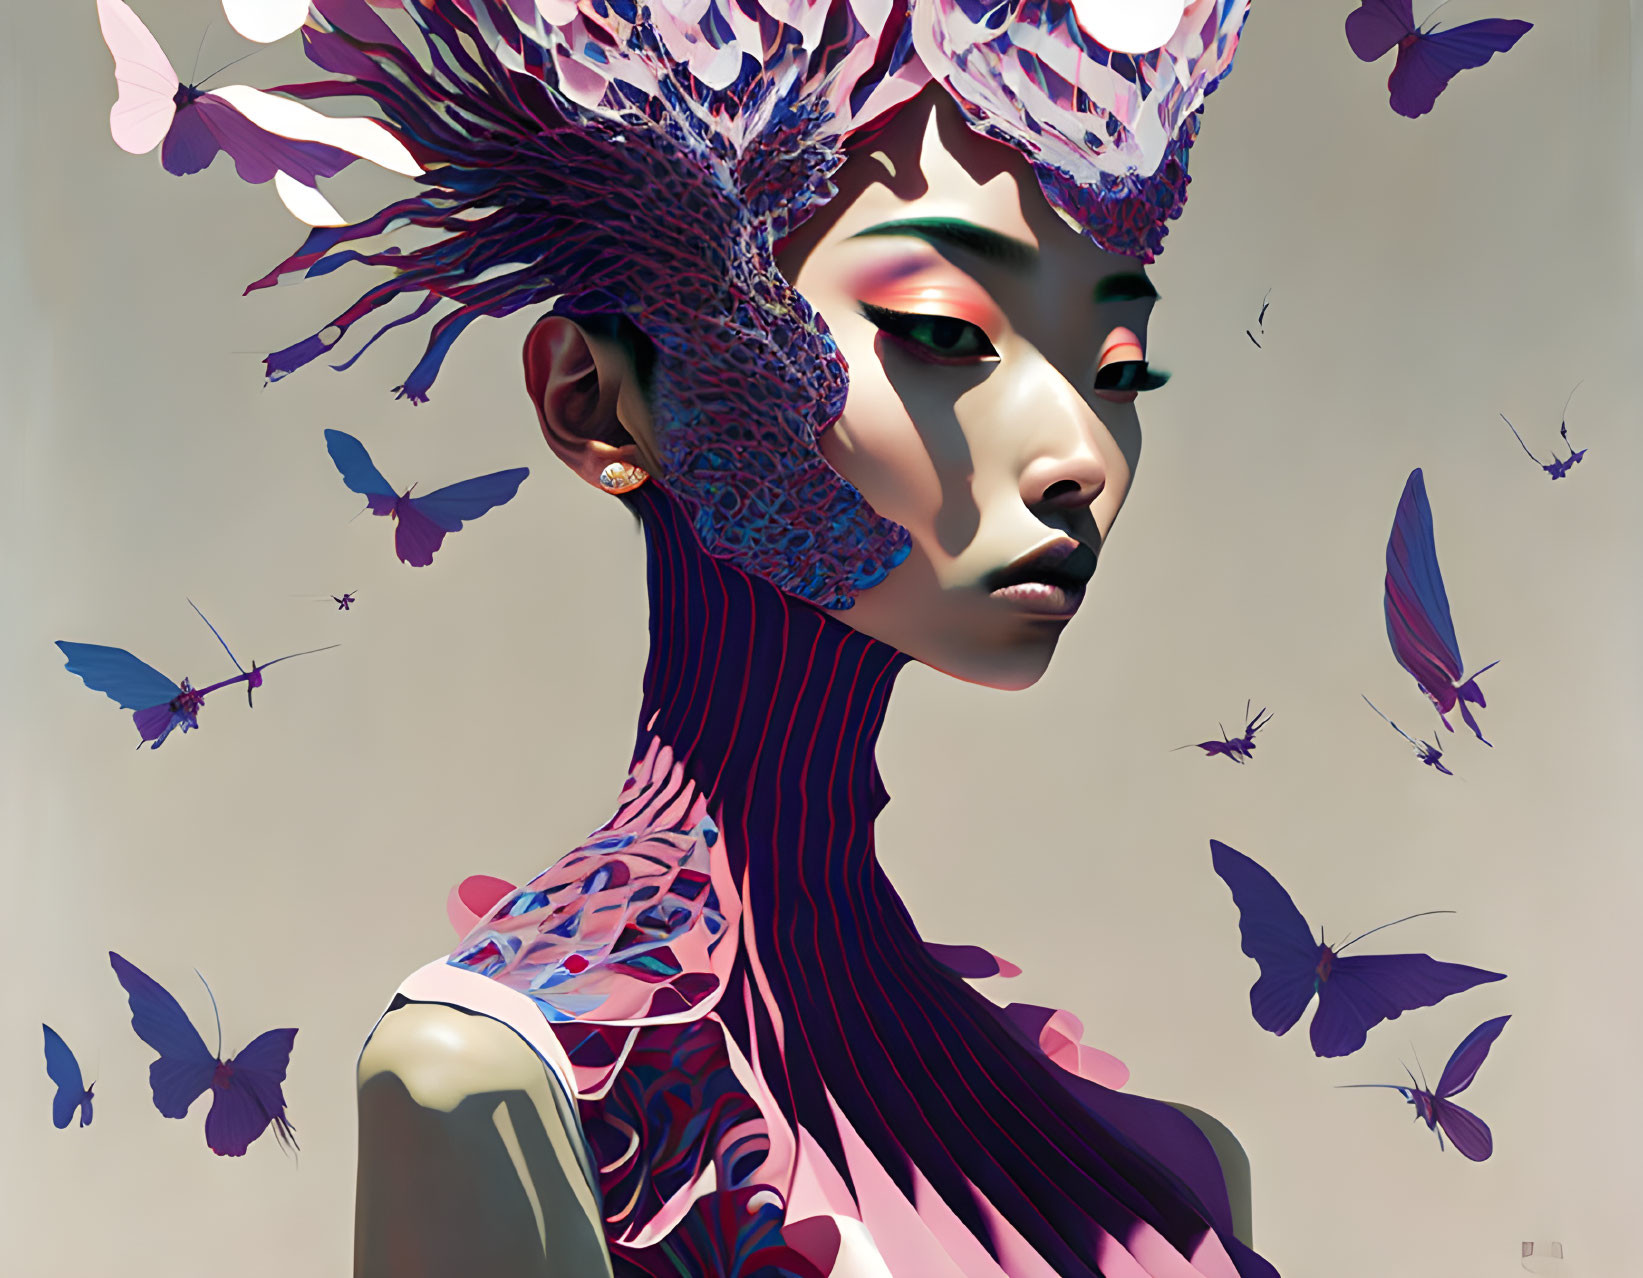 Stylized digital portrait of a woman with butterflies and intricate patterns